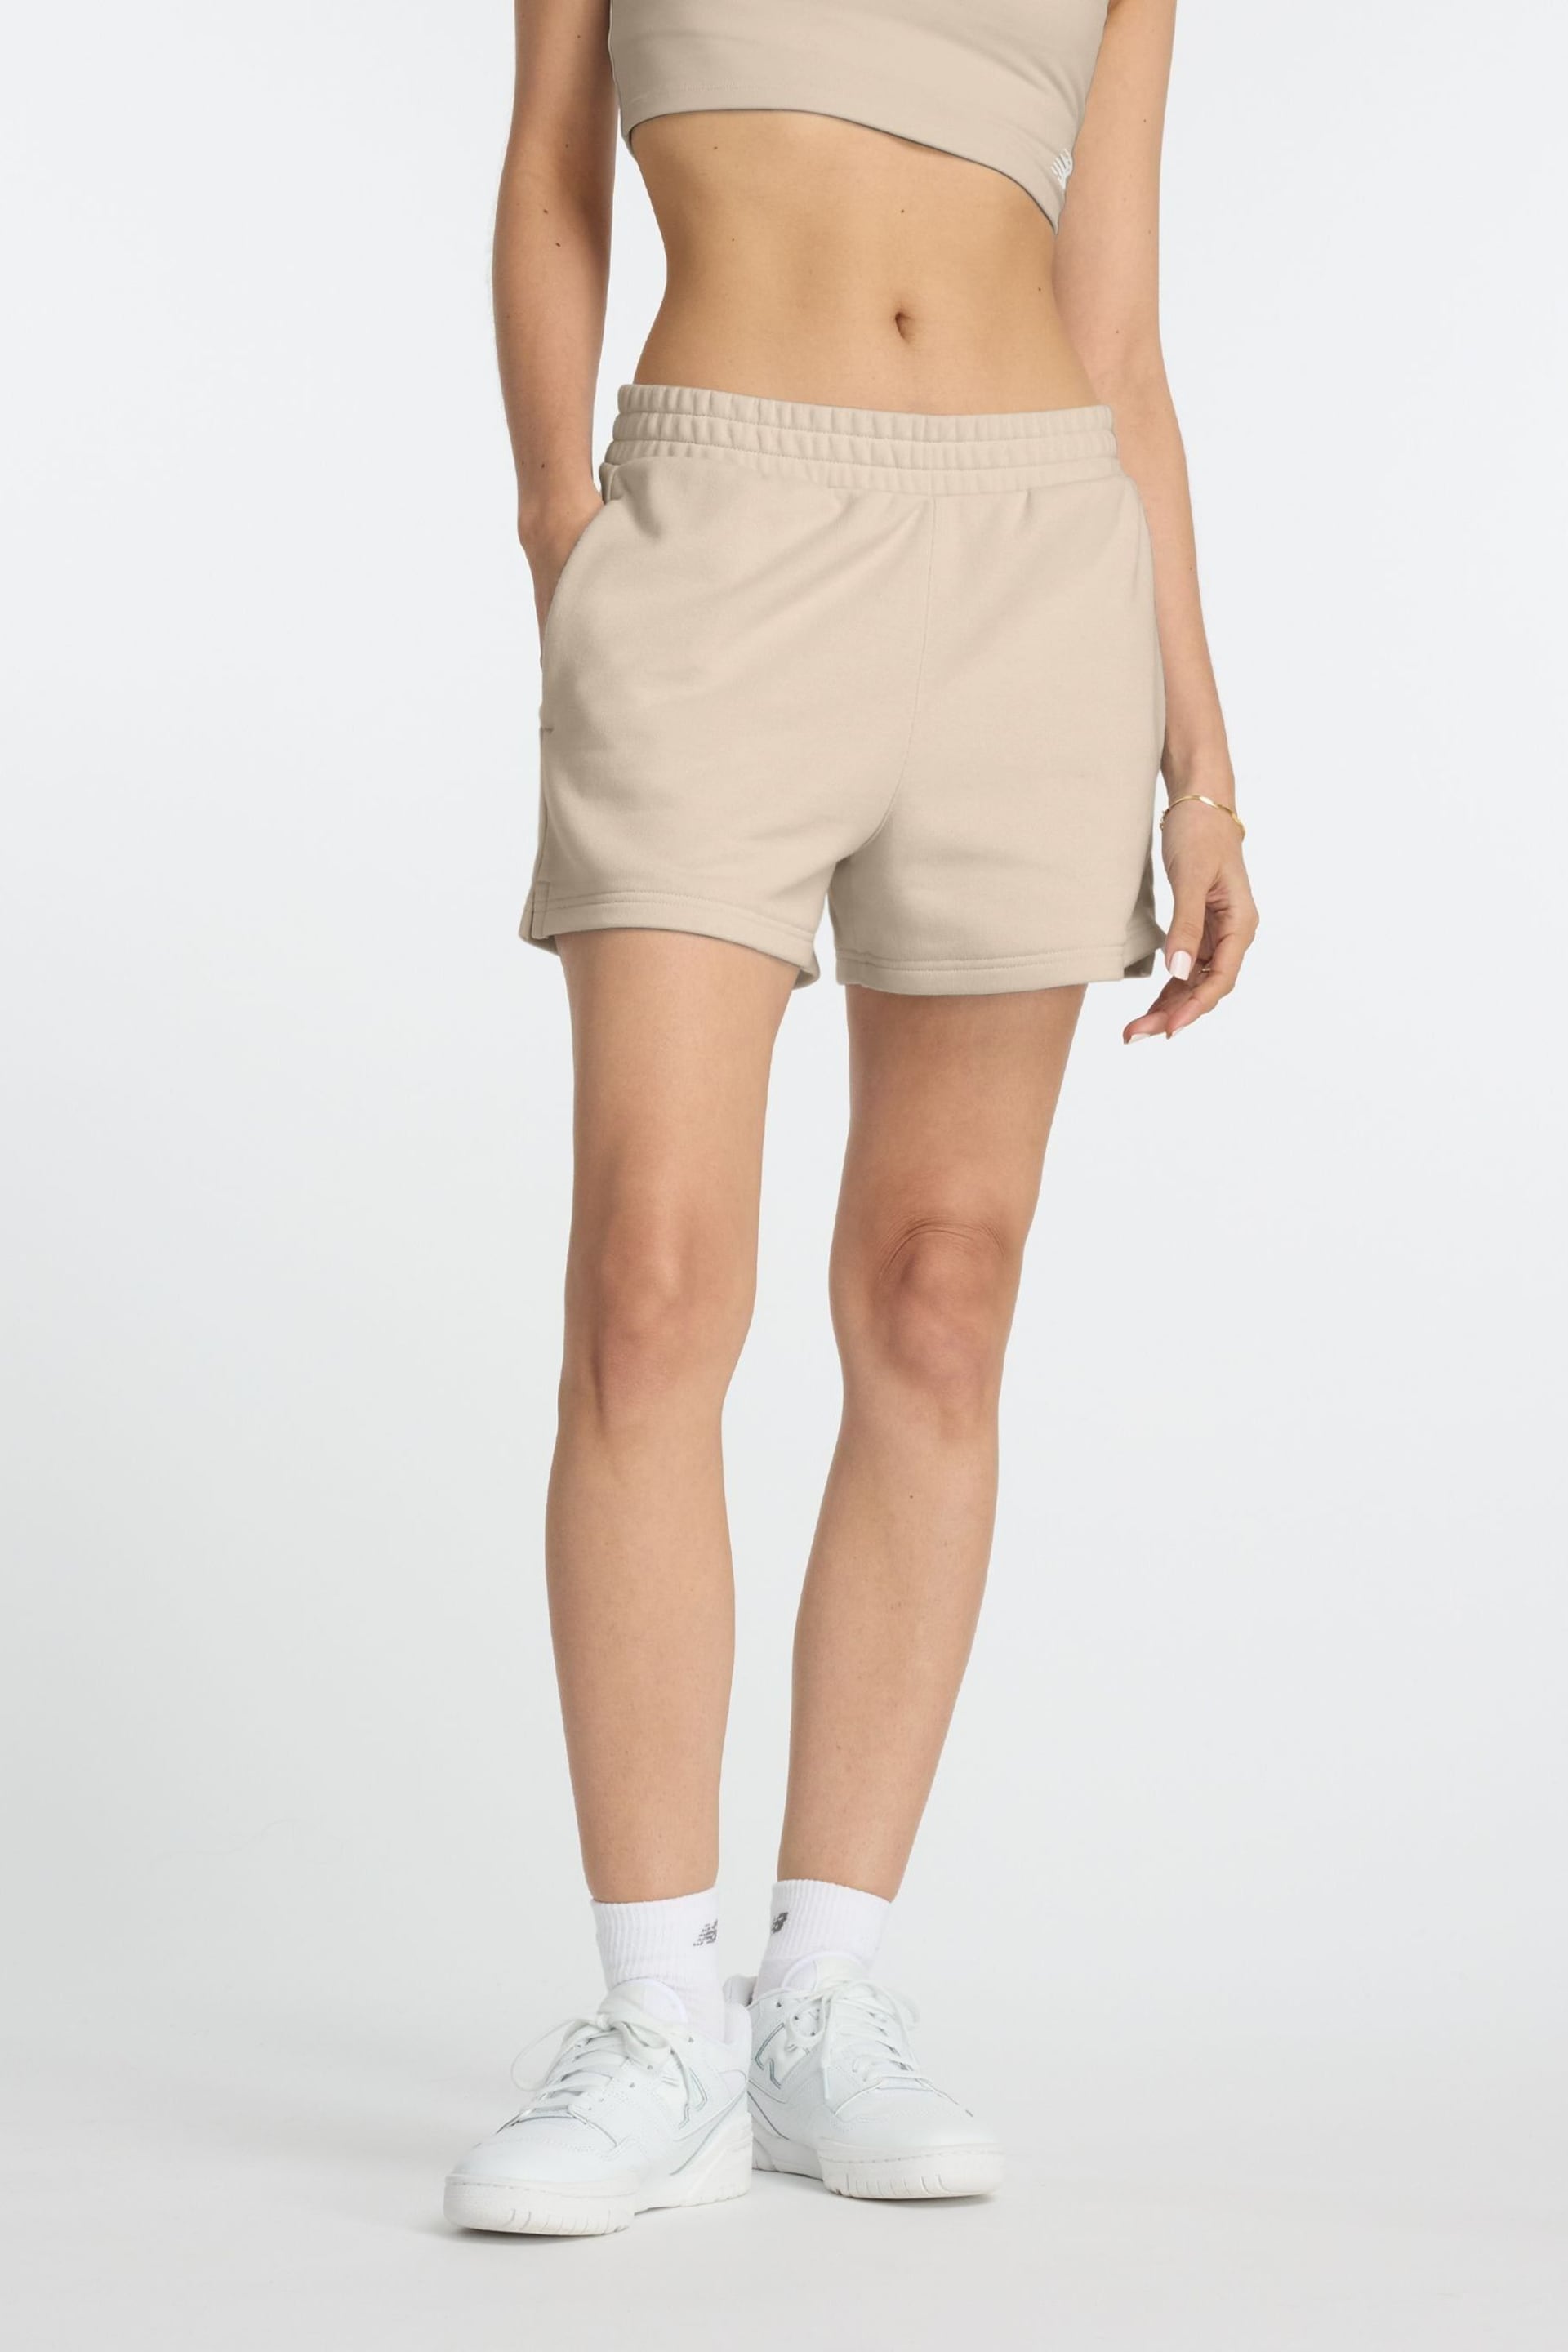 New Balance Brown Linear Heritage French Terry Shorts - Image 1 of 7